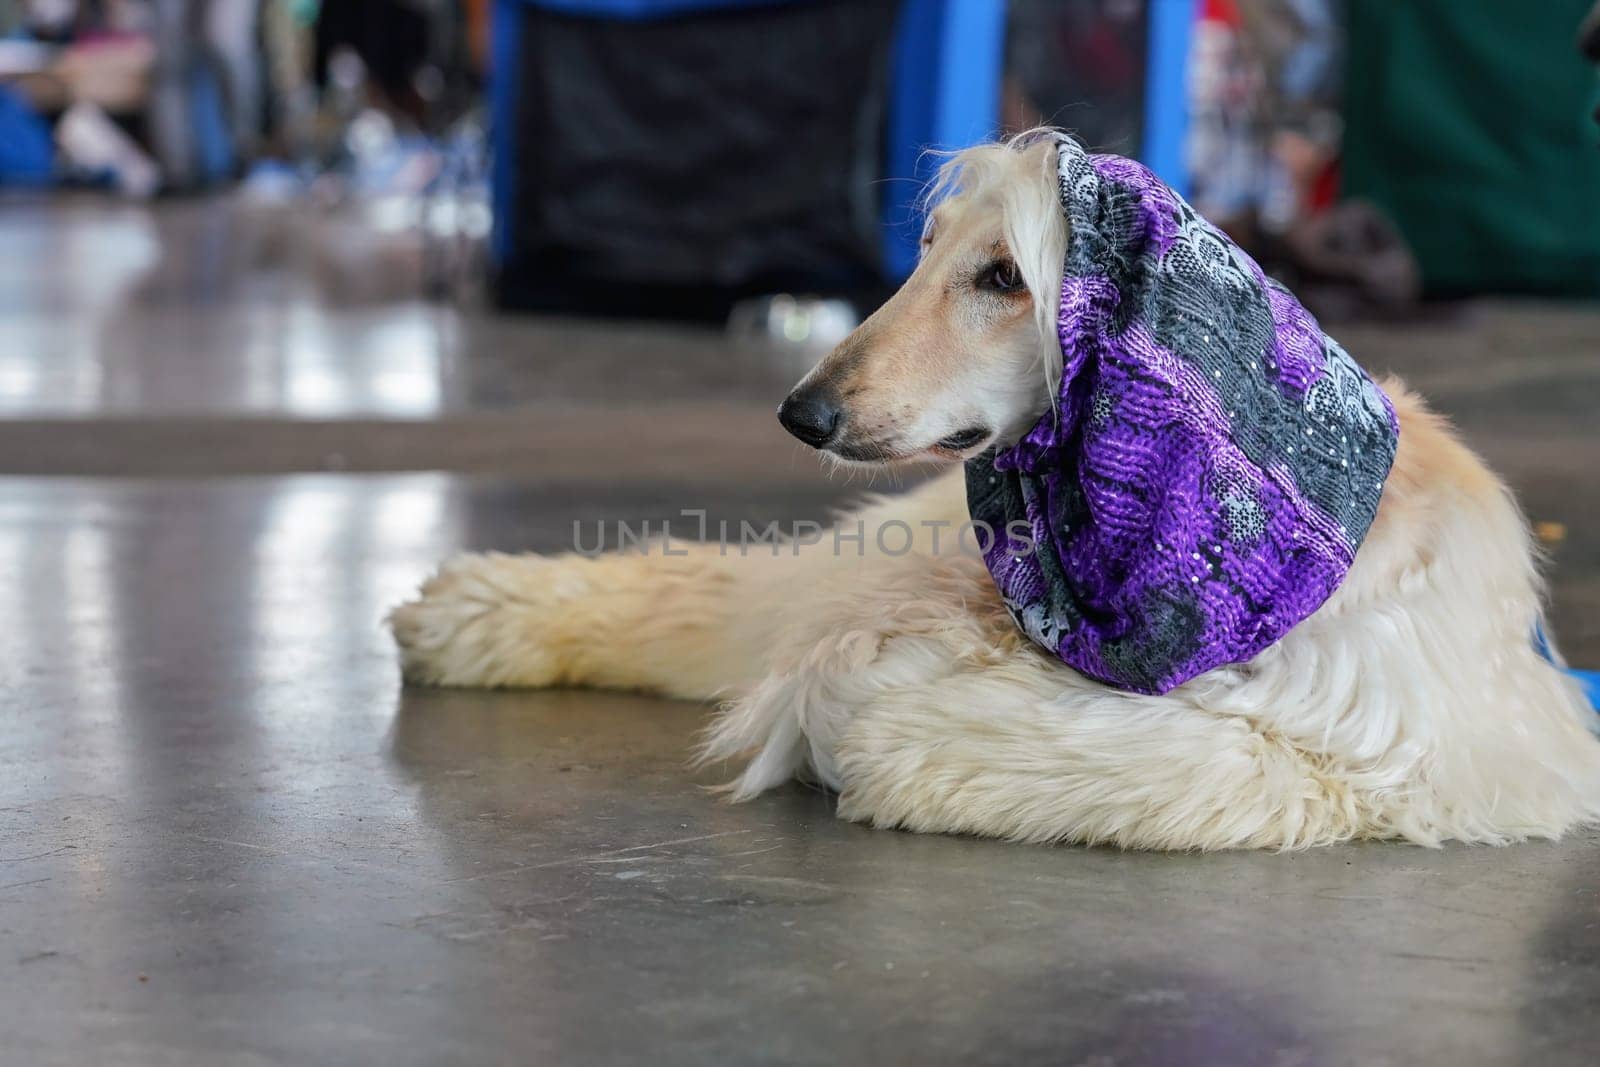 Russian borzoi laying on the stone floor indoor hall, violet scarf covering head, during dog show contest by Ivanko